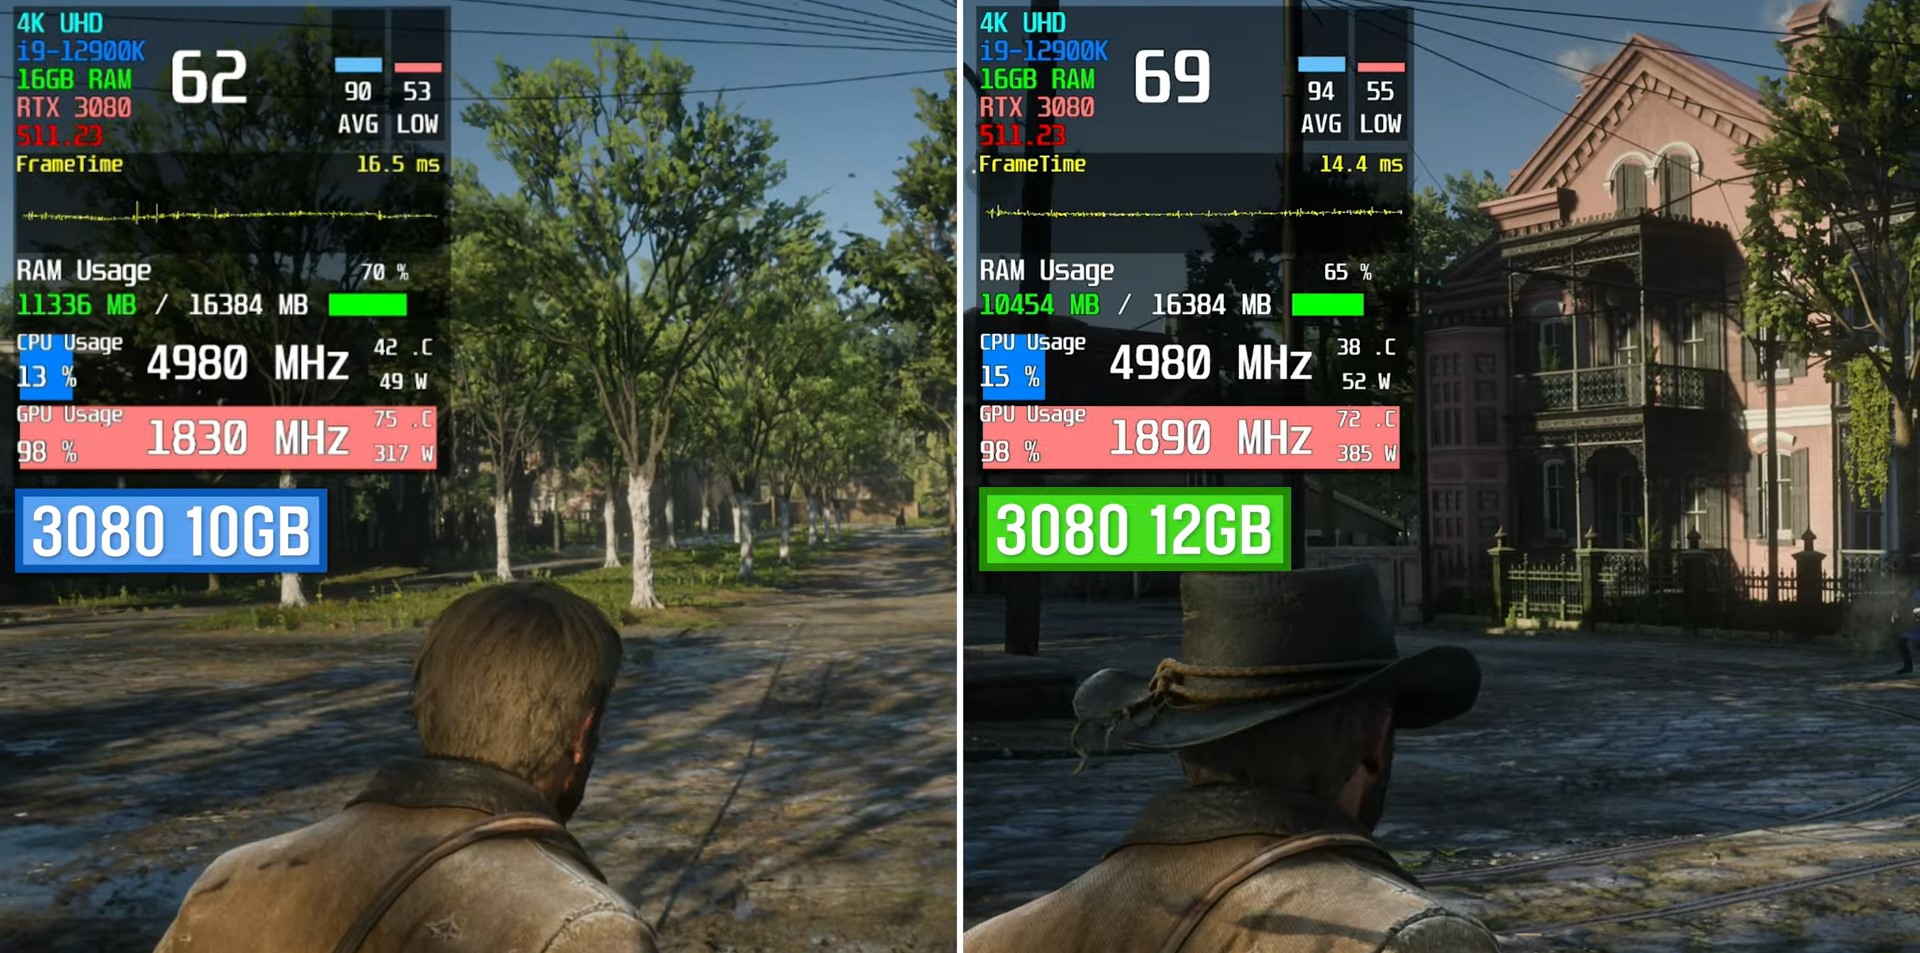 Benchmark Test of Red Dead Redemption 2 on RTX 3080 10 GB and RTX 3080 12 GB at 4K